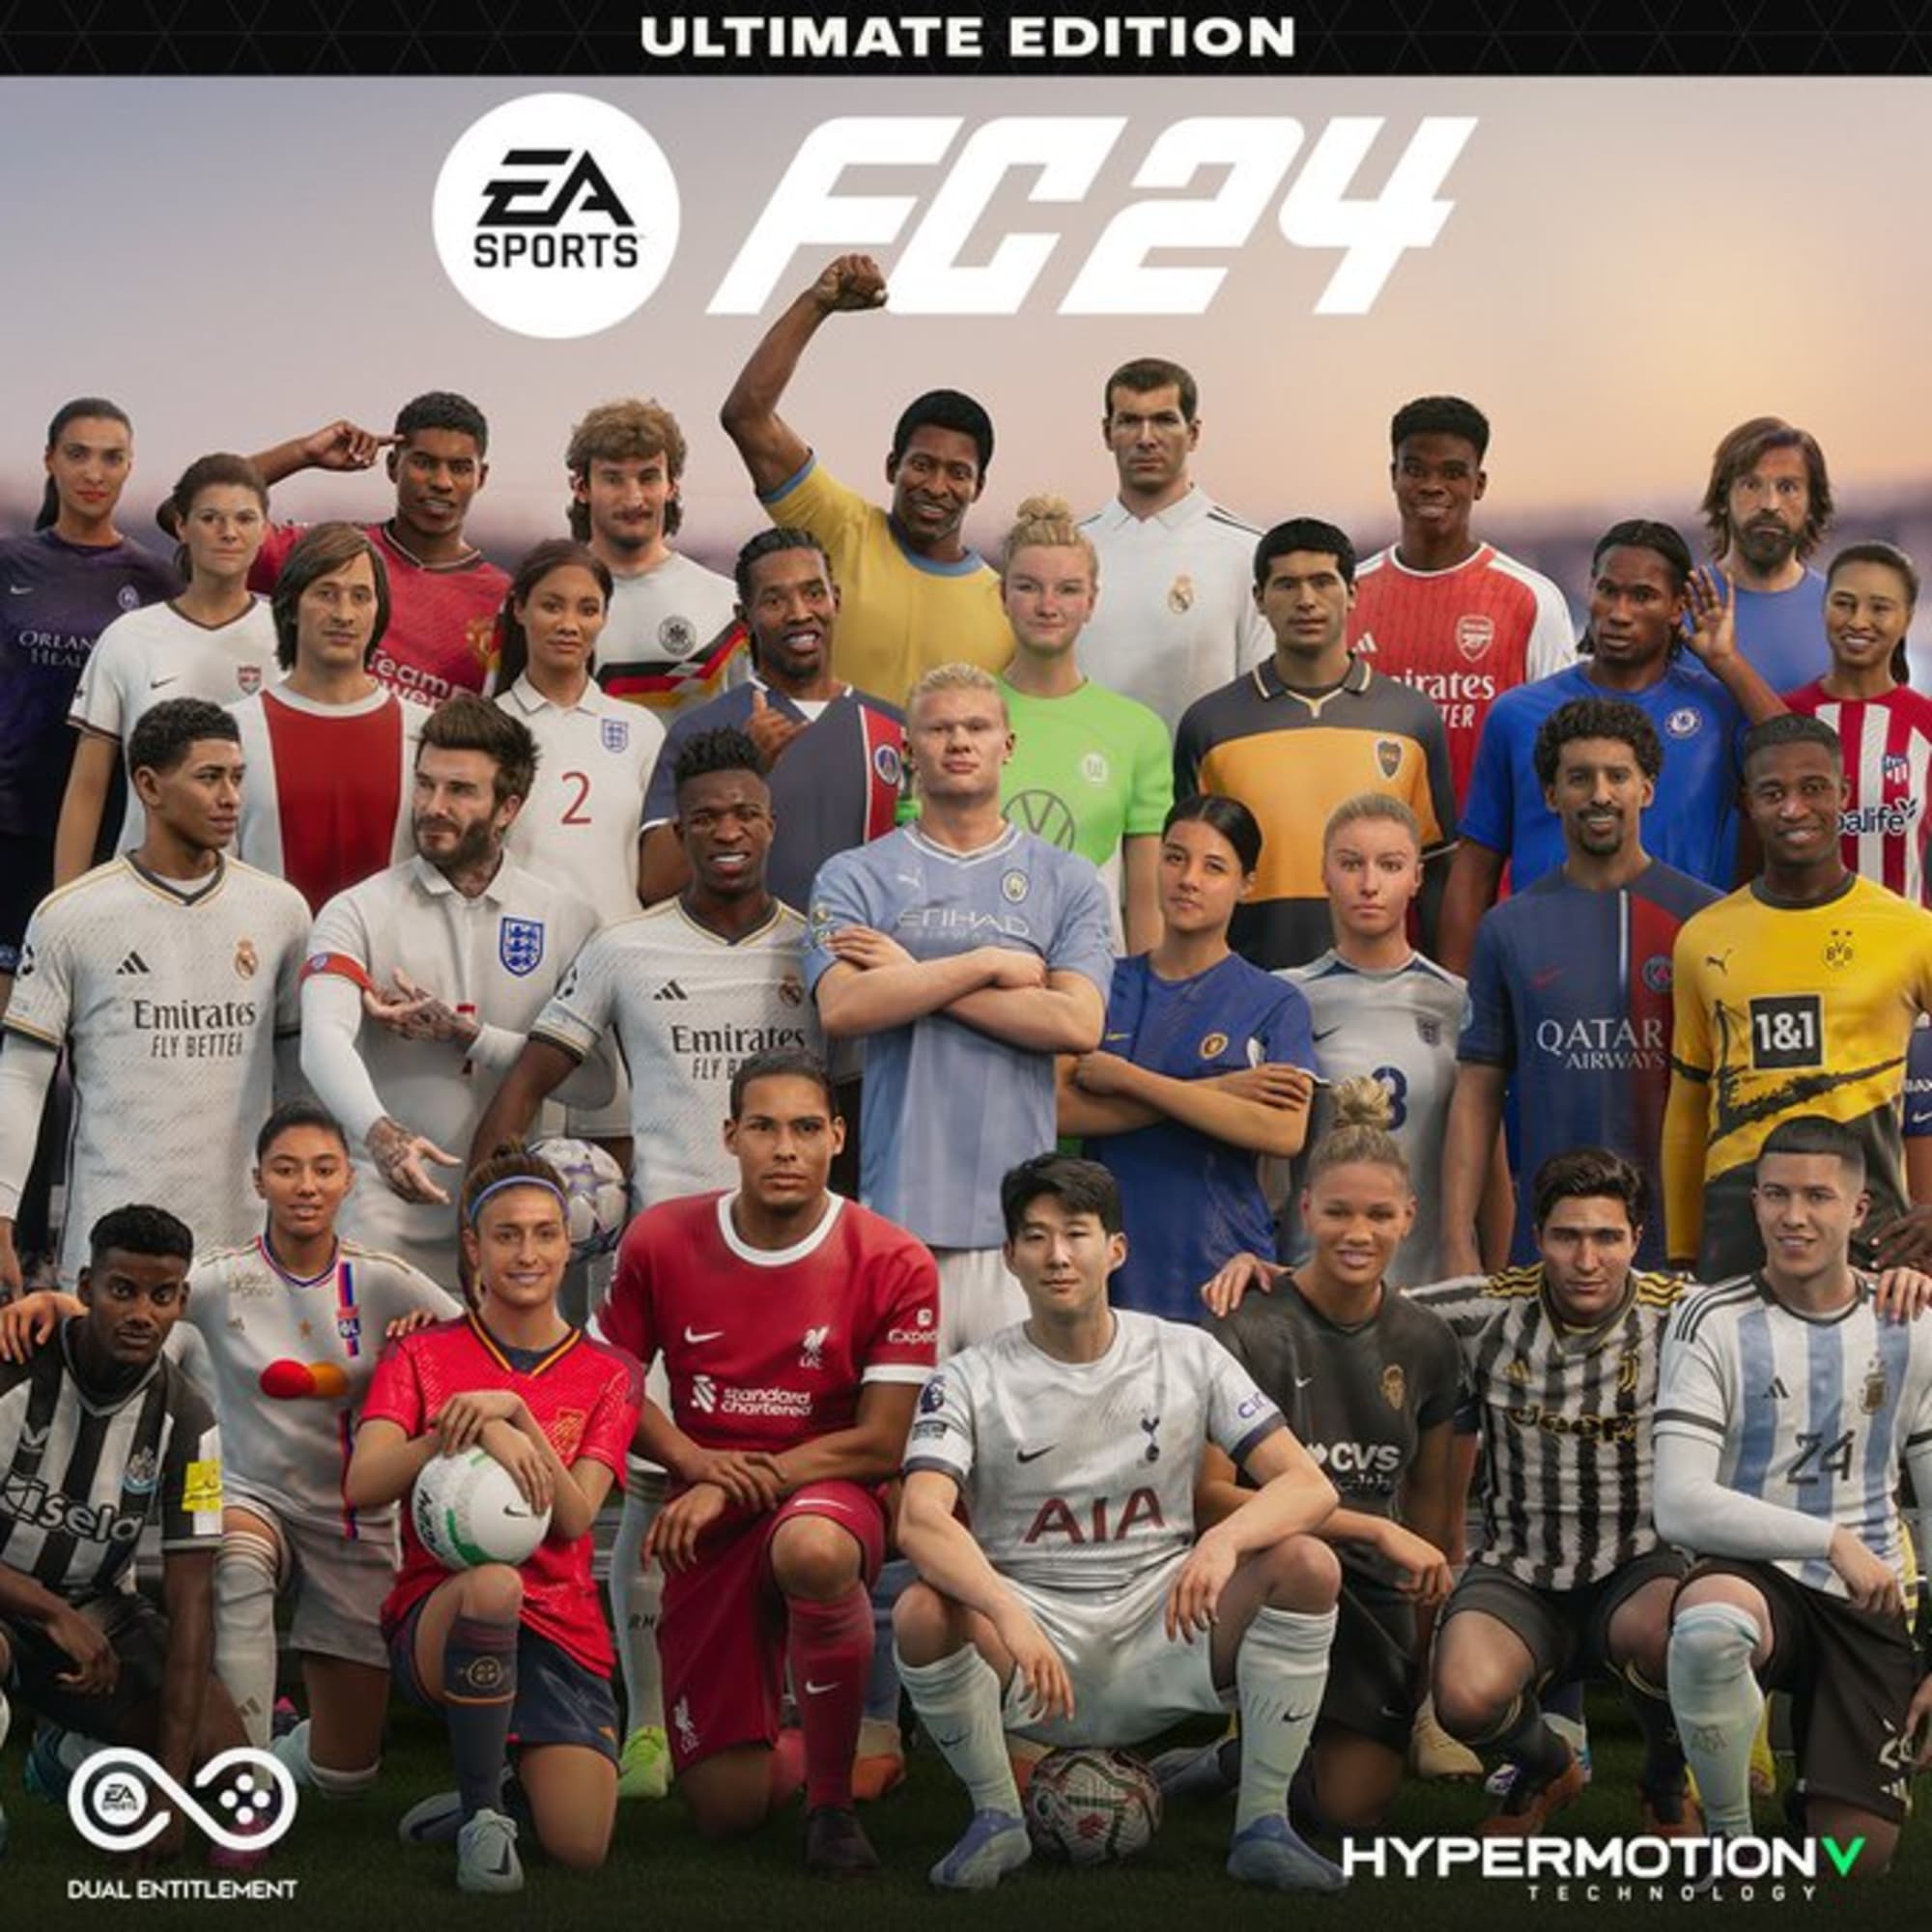 FIFA 23: How to get beta code, EA Play early access release date